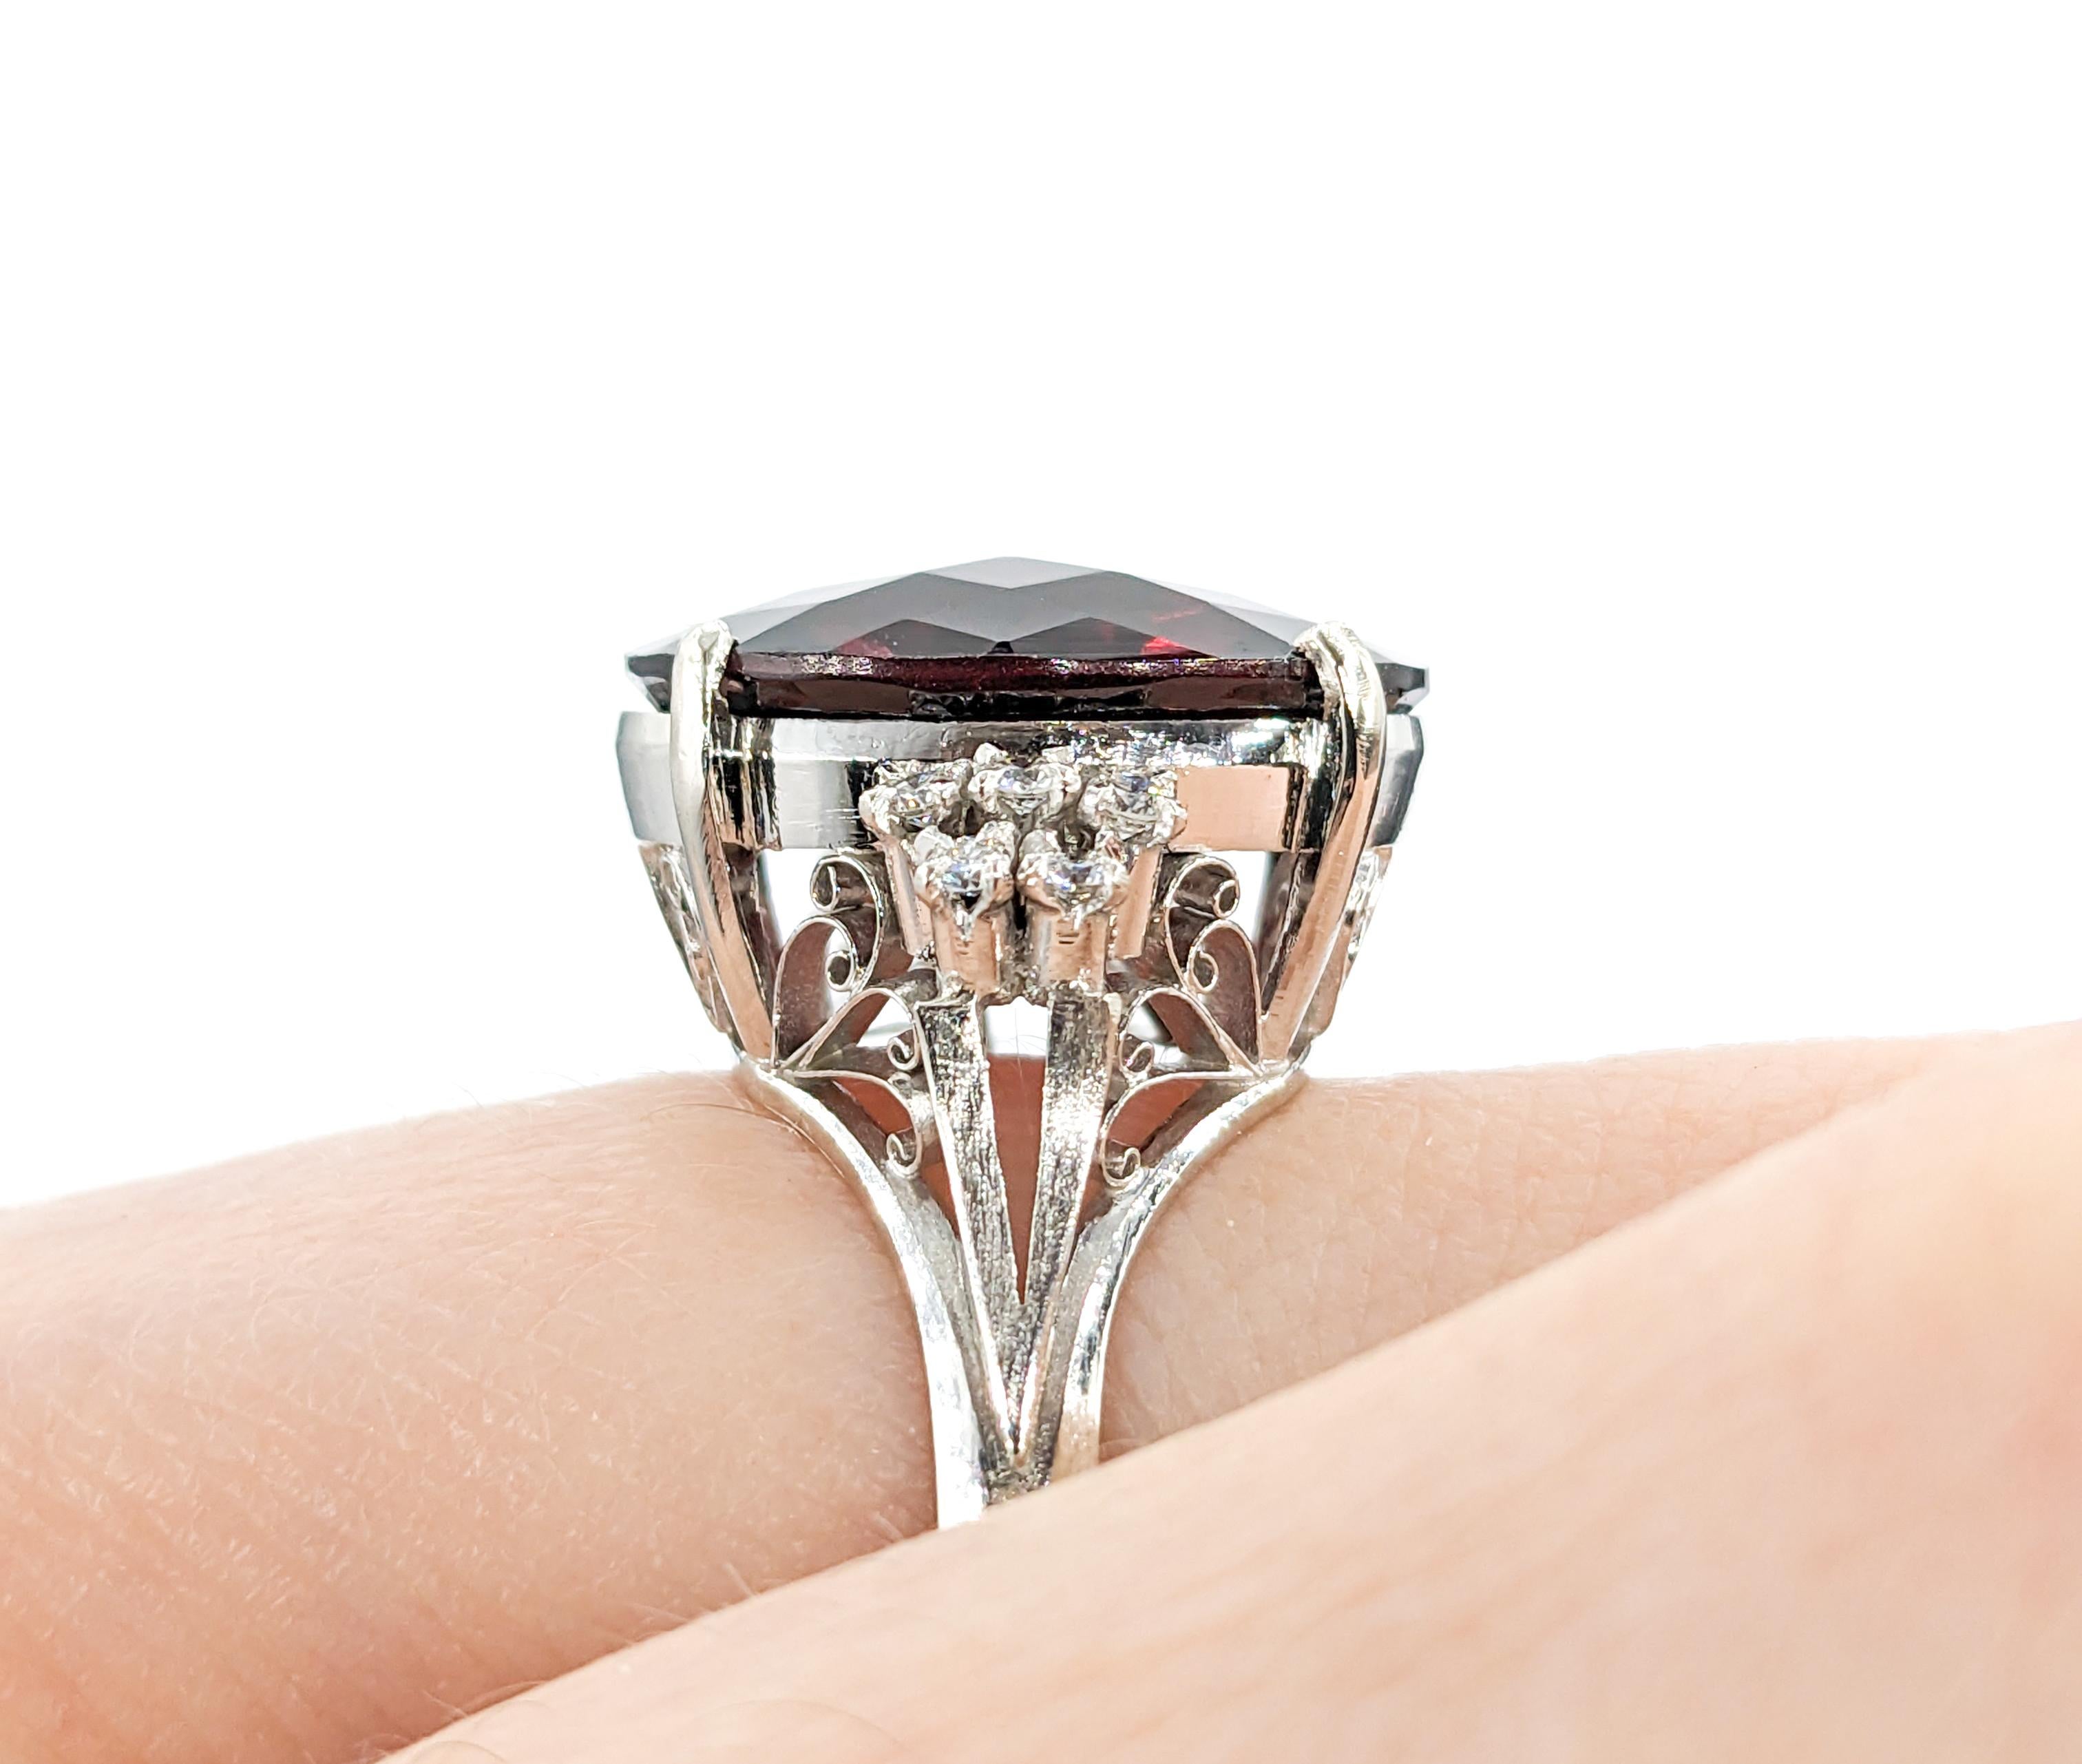 9.88ct Garnet & Diamond Ring In 850pt Platinum

Introducing this exquisite Garnet Ring, elegantly crafted in 850pt Platinum and adorned with .20ctw of shimmering Diamonds. The center stone is a striking 16.5x12mm Garnet, with a deep red color. The